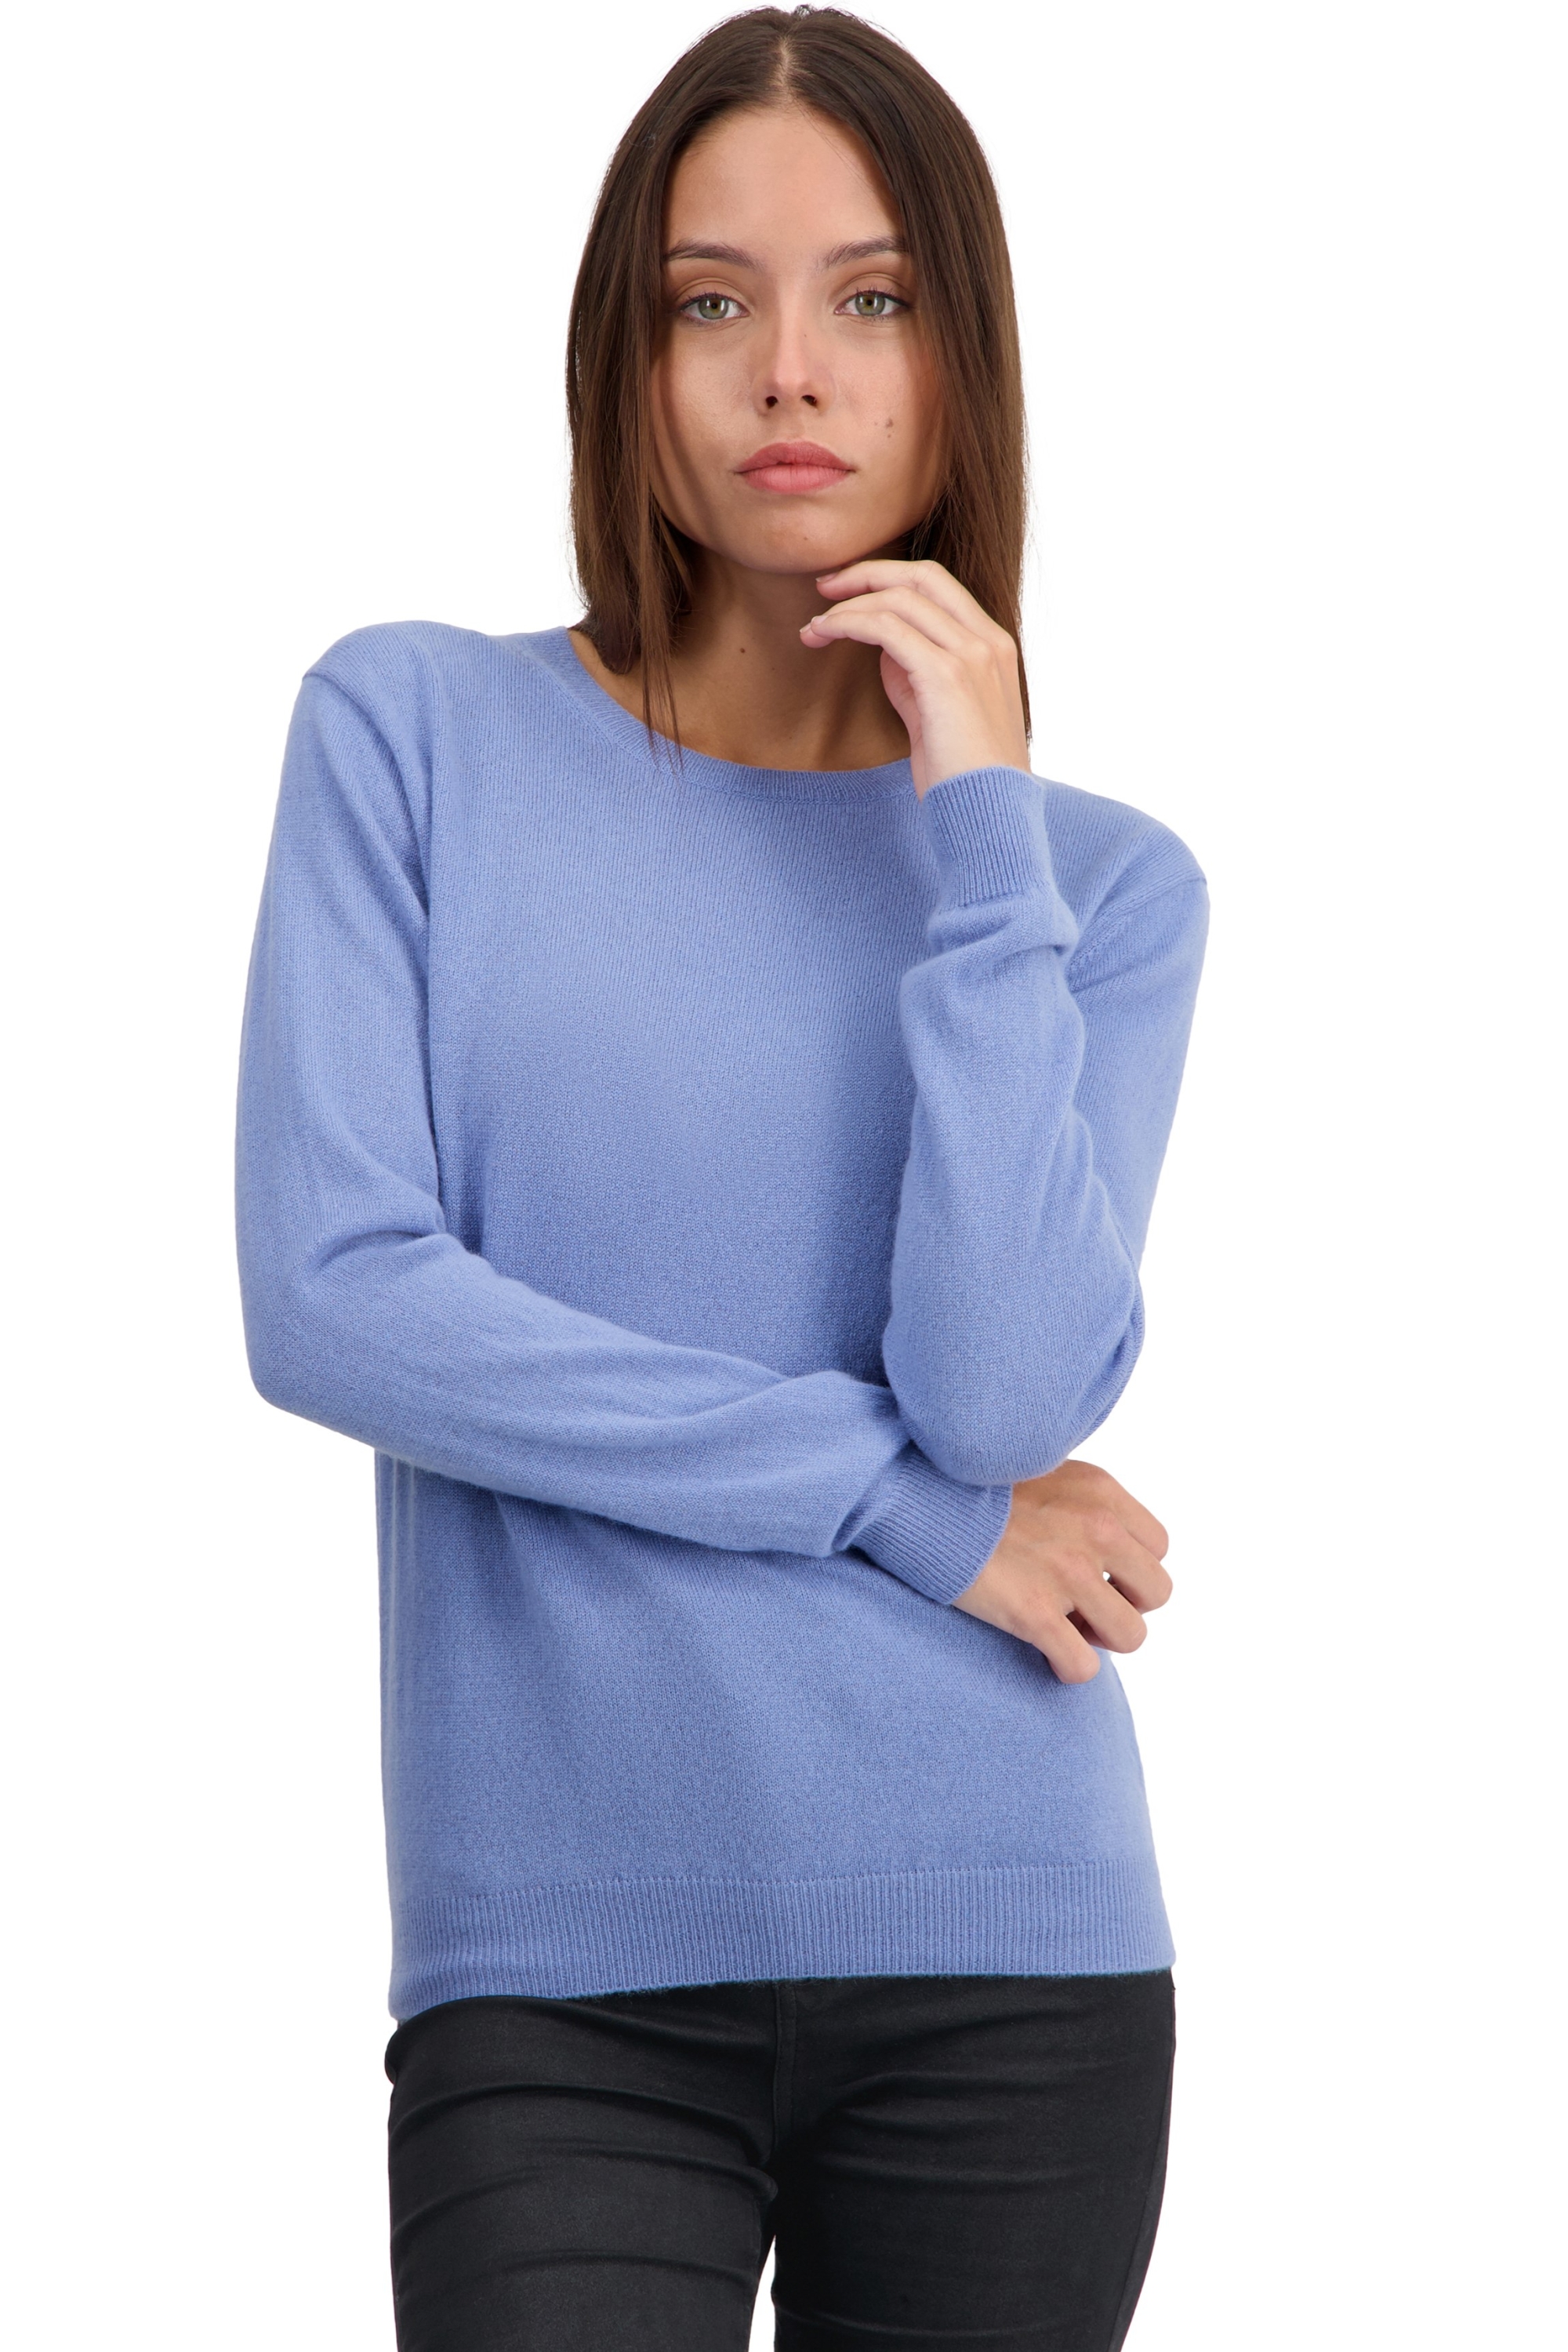 Cashmere ladies basic sweaters at low prices thalia first light blue m